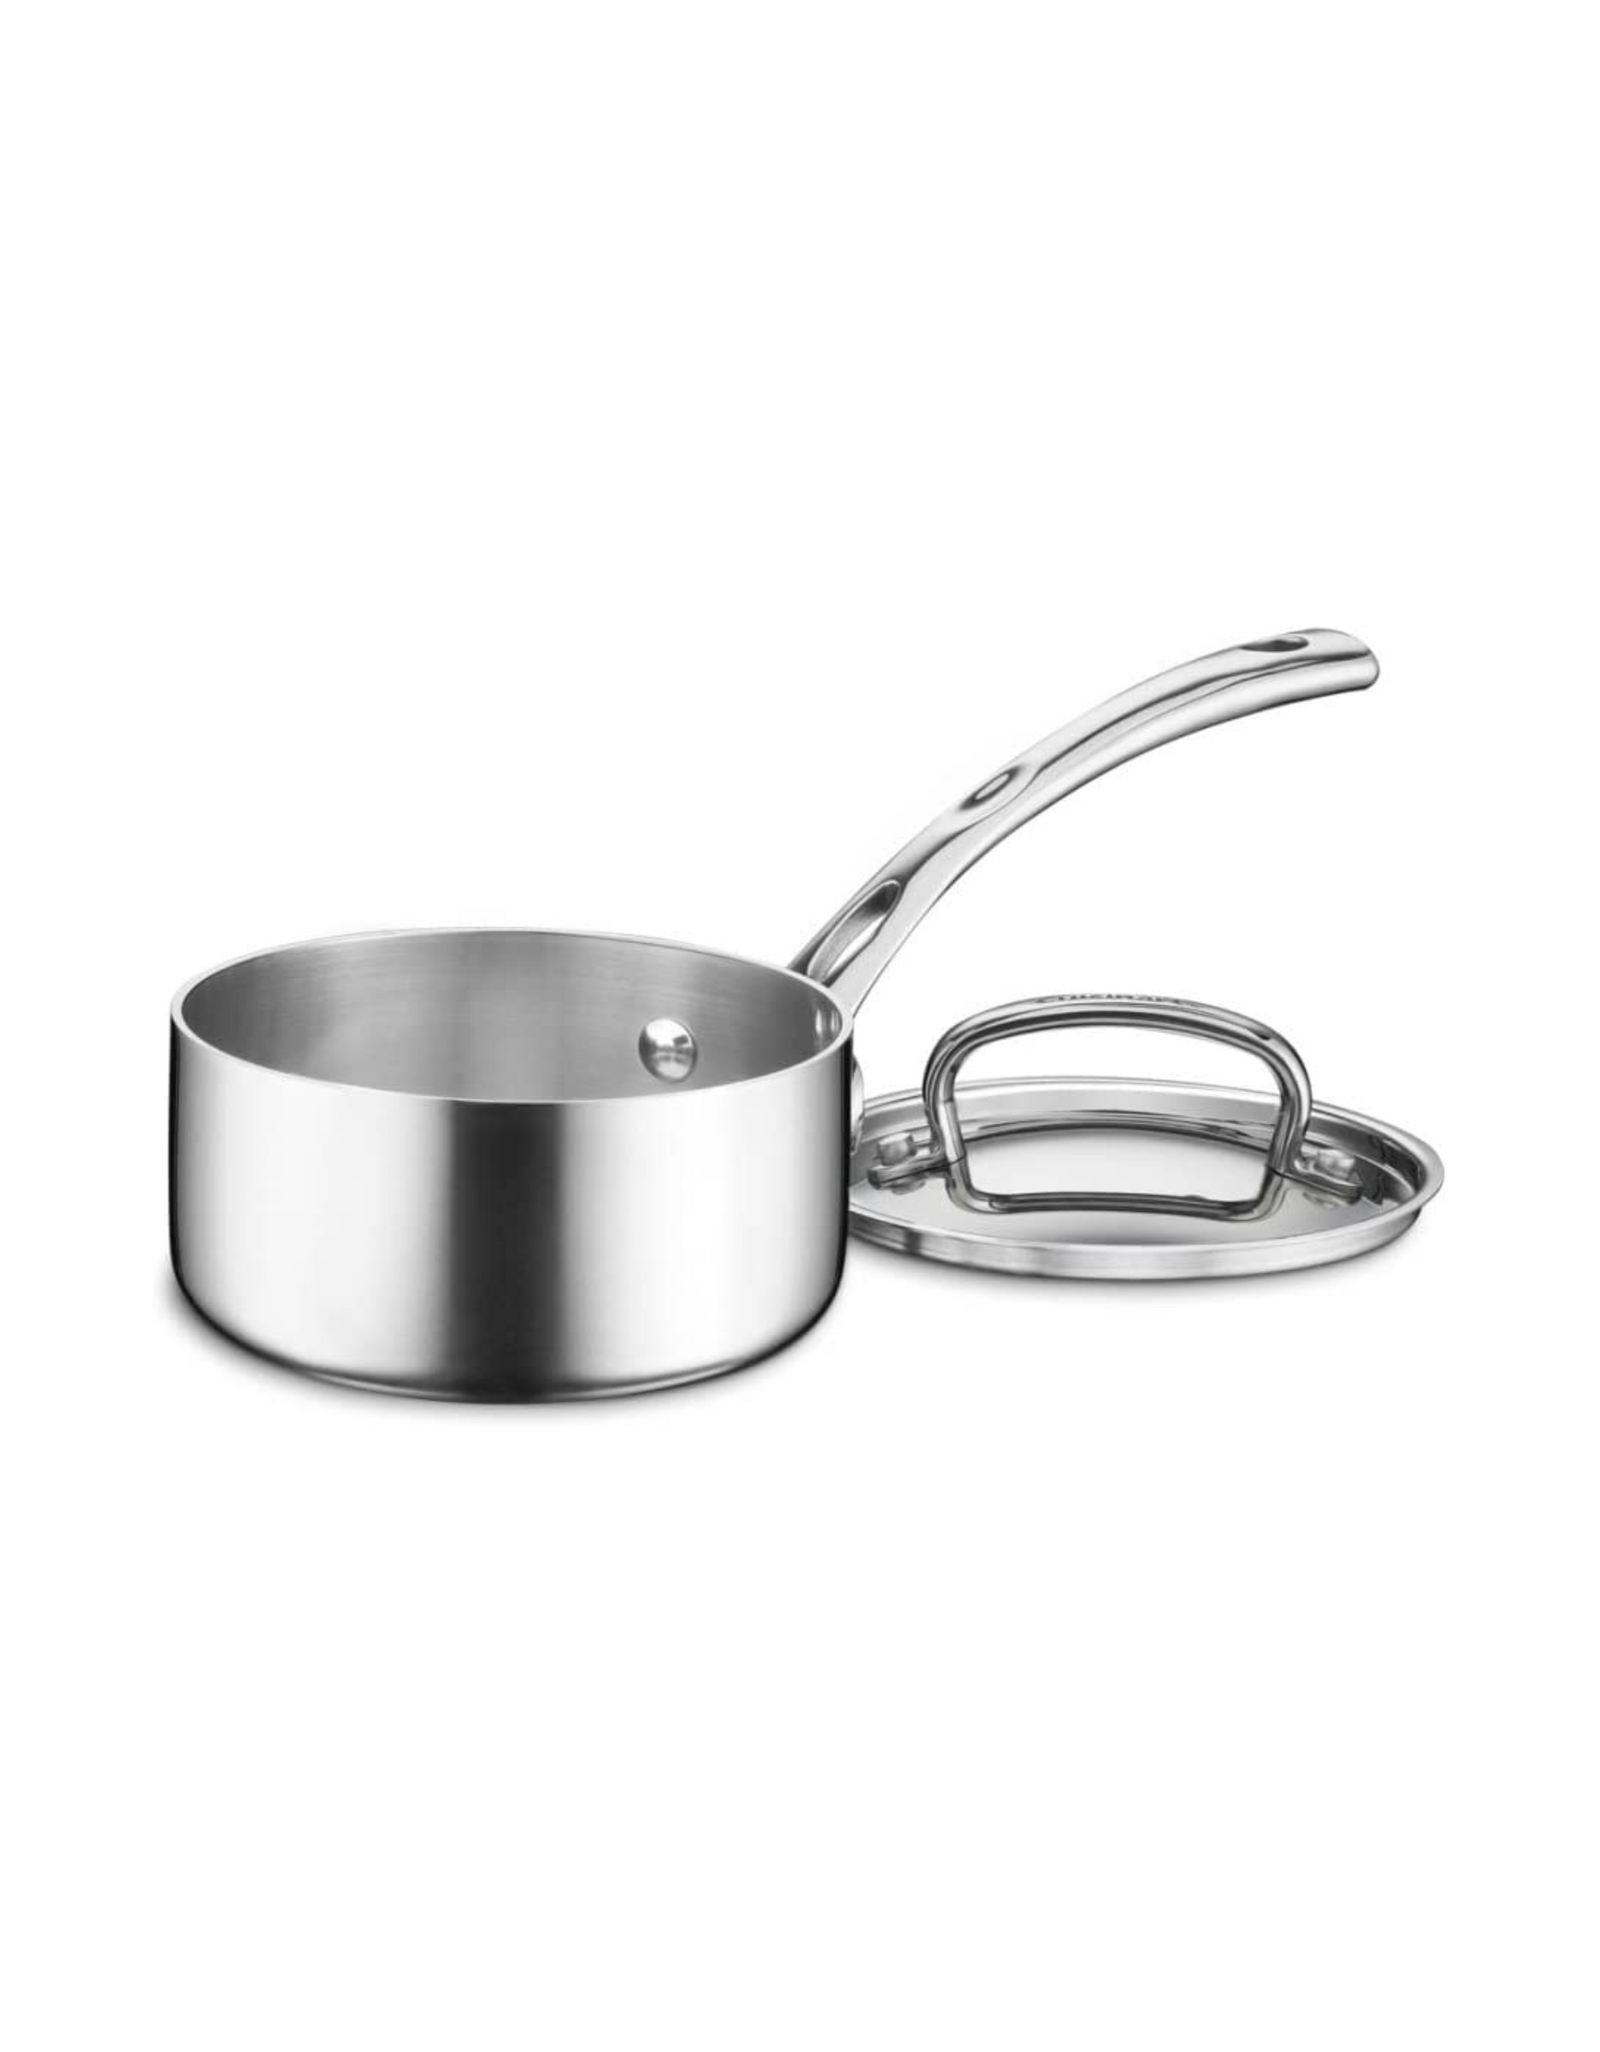 Cuisinart French Classic Tri-Ply Stainless Saucepan with Cover, 1 Qt, Silver